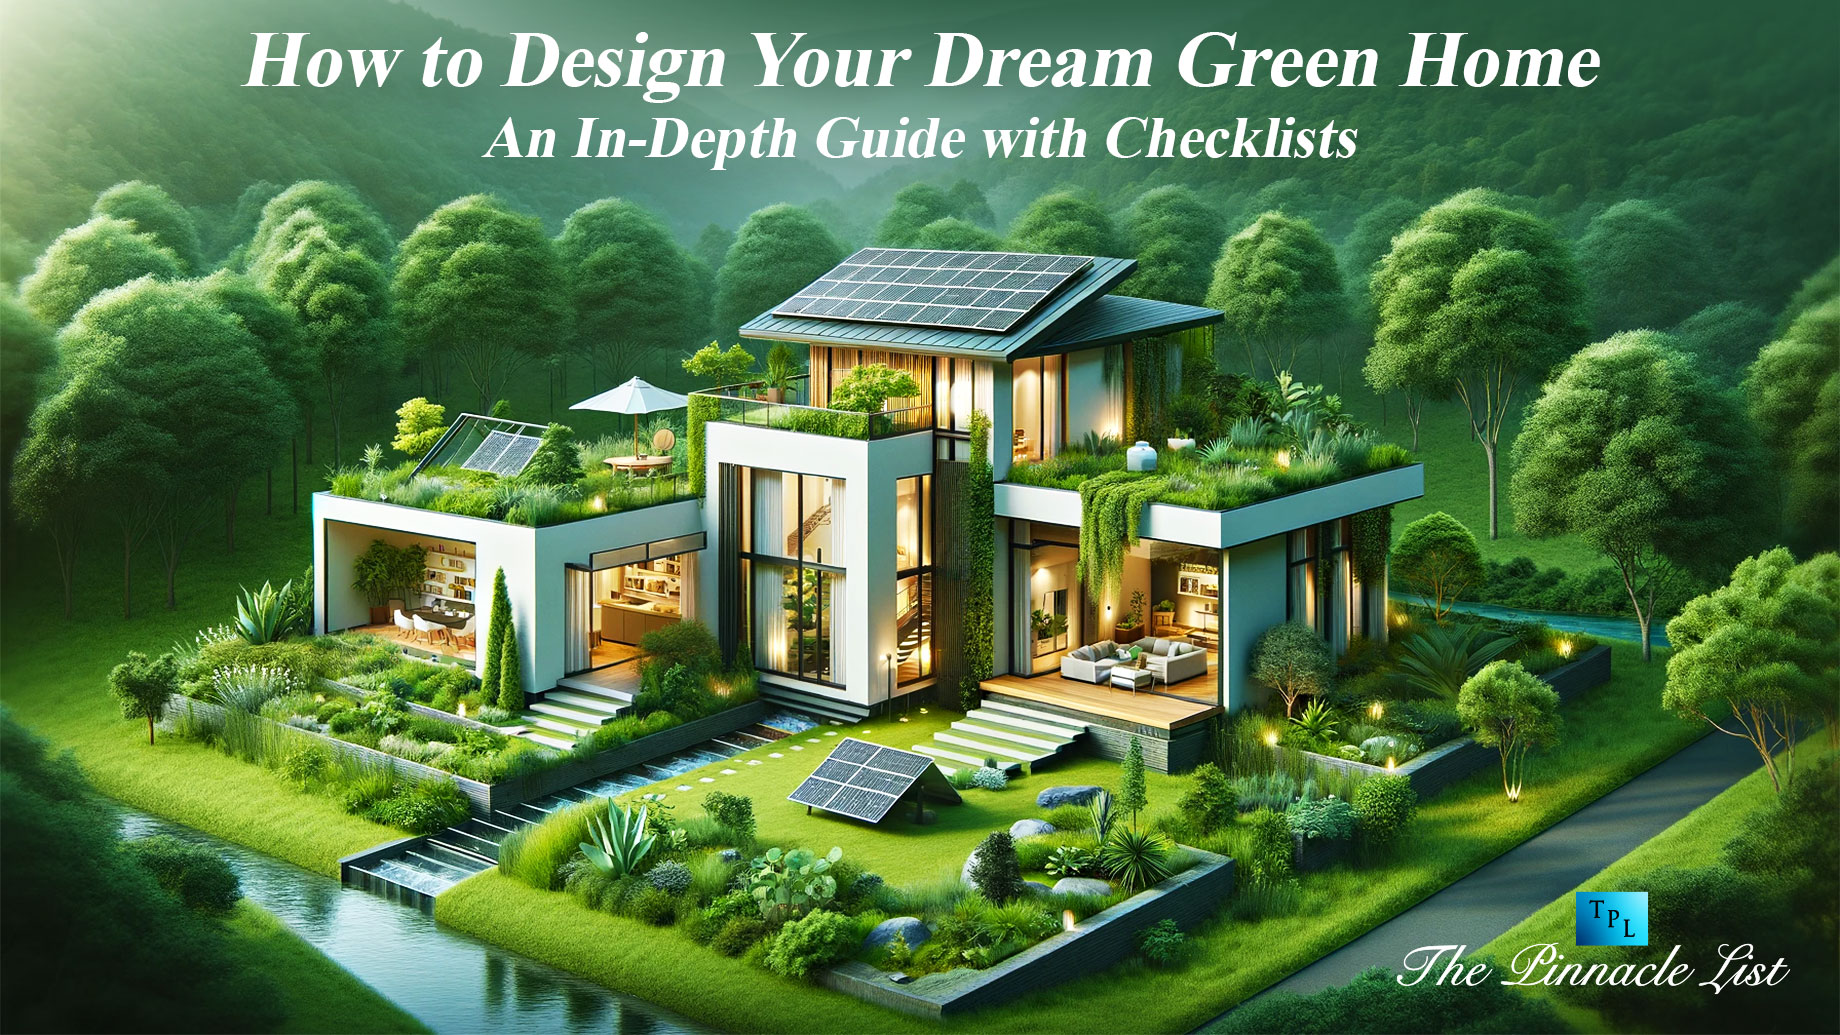 How to Design Your Dream Green Home: An In-Depth Guide with Checklists